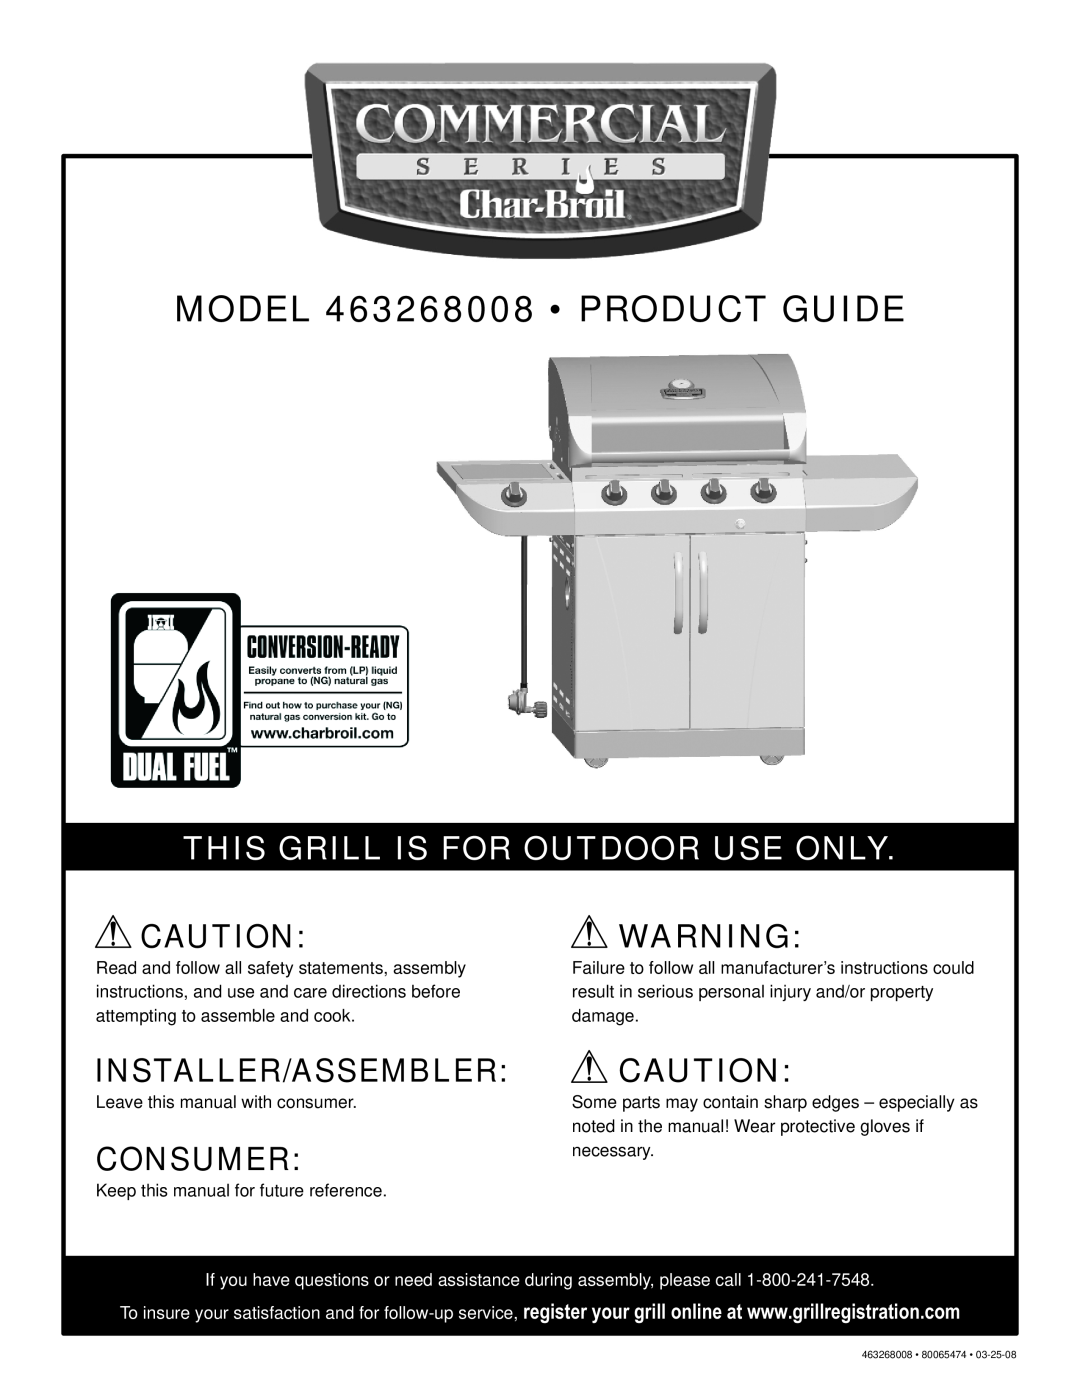 Char-Broil manual MODEL 463268008 PRODUCT GUIDE, If you have questions or need assistance during assembly, please call 